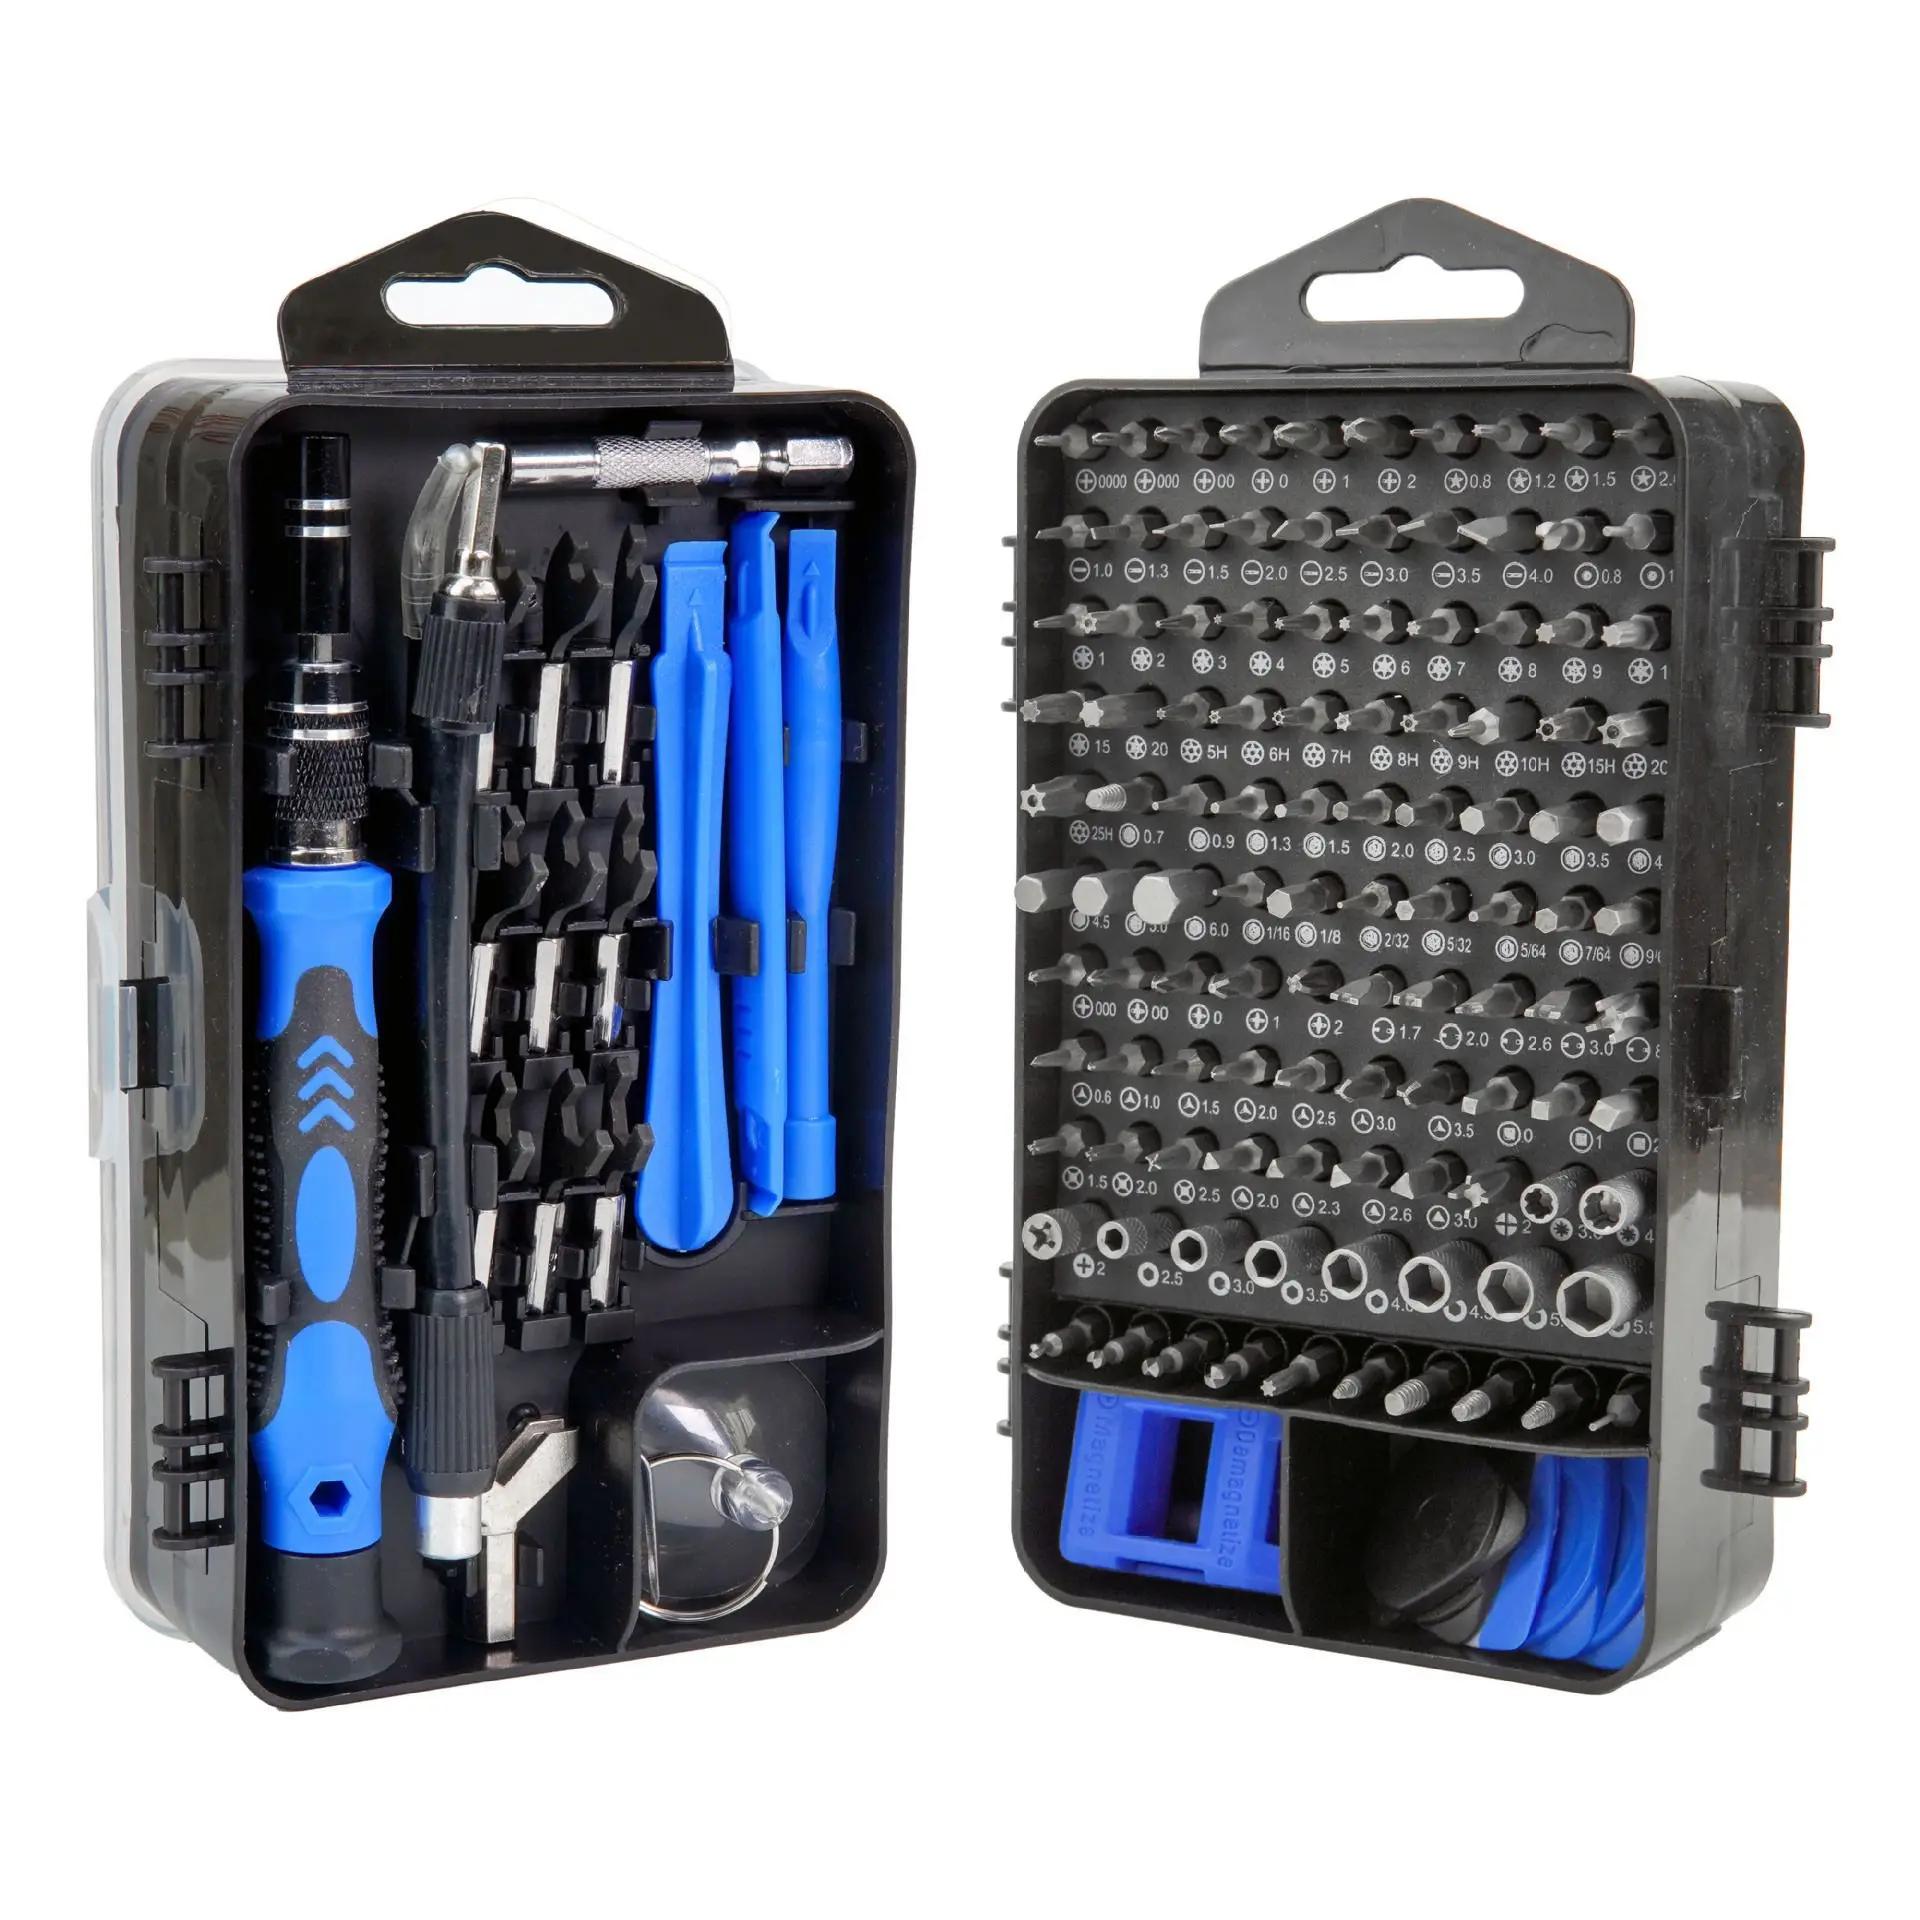 138 In One Screwdriver Set Six Colors Available Household Disassembly Tool Multi-function Precision Screwdriver Head Tool Set 8 in 1 disassembly tool set for smartphone repair tool kit screwdriver kit torx 0 8